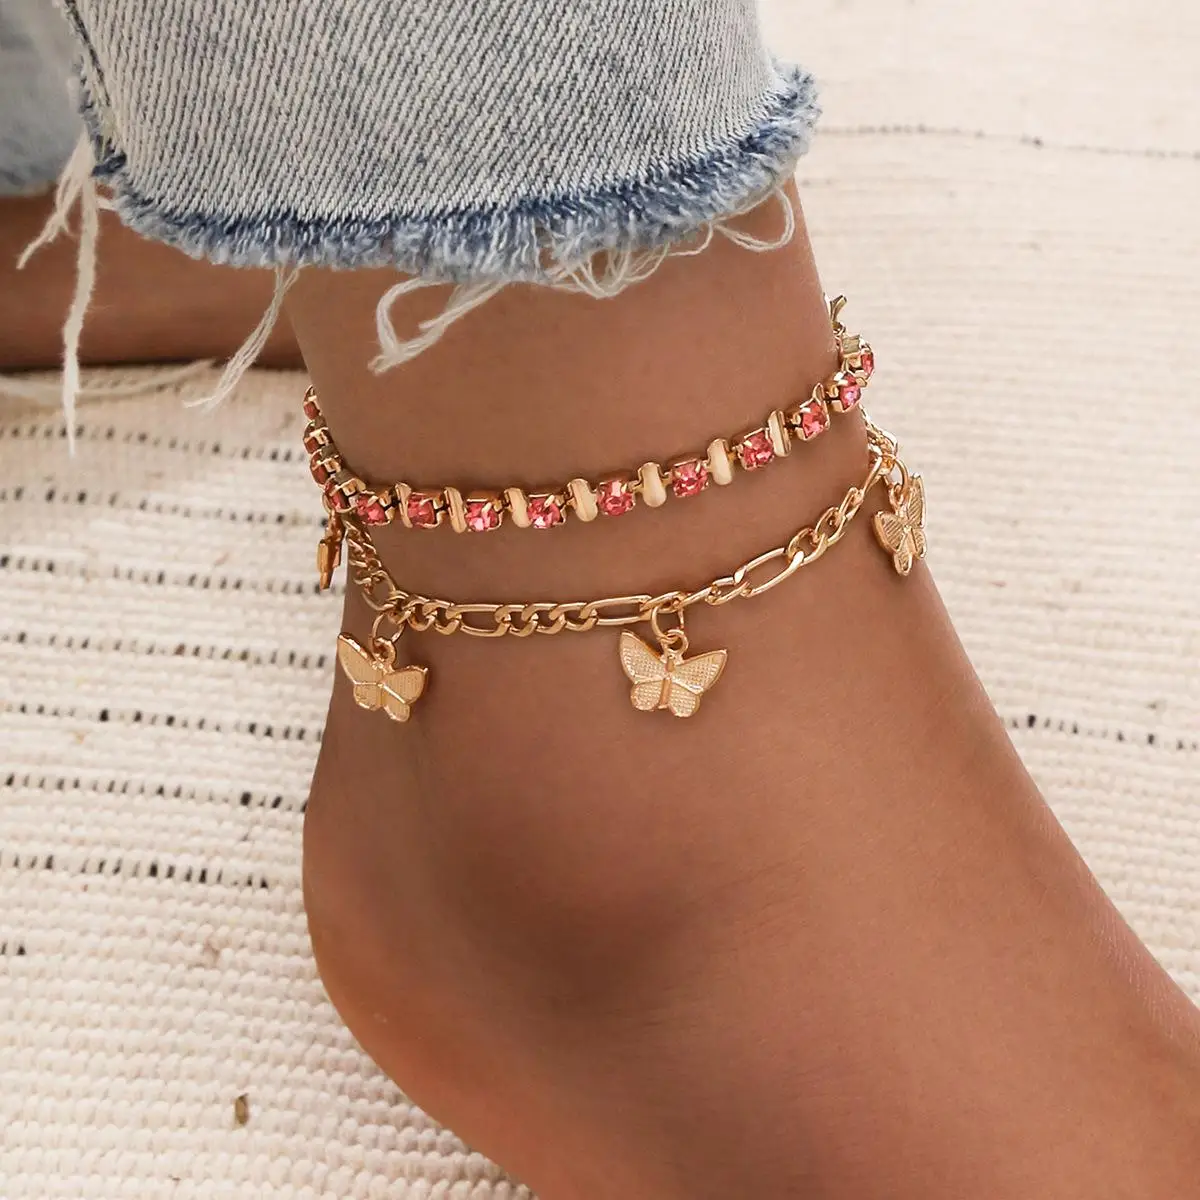 

YD Jewelry Amazon 18K Gold Adjustable Butterfly Anklets, Hot sale Summer Beach butterfly Charm Anklet For Women Girls Jewelry